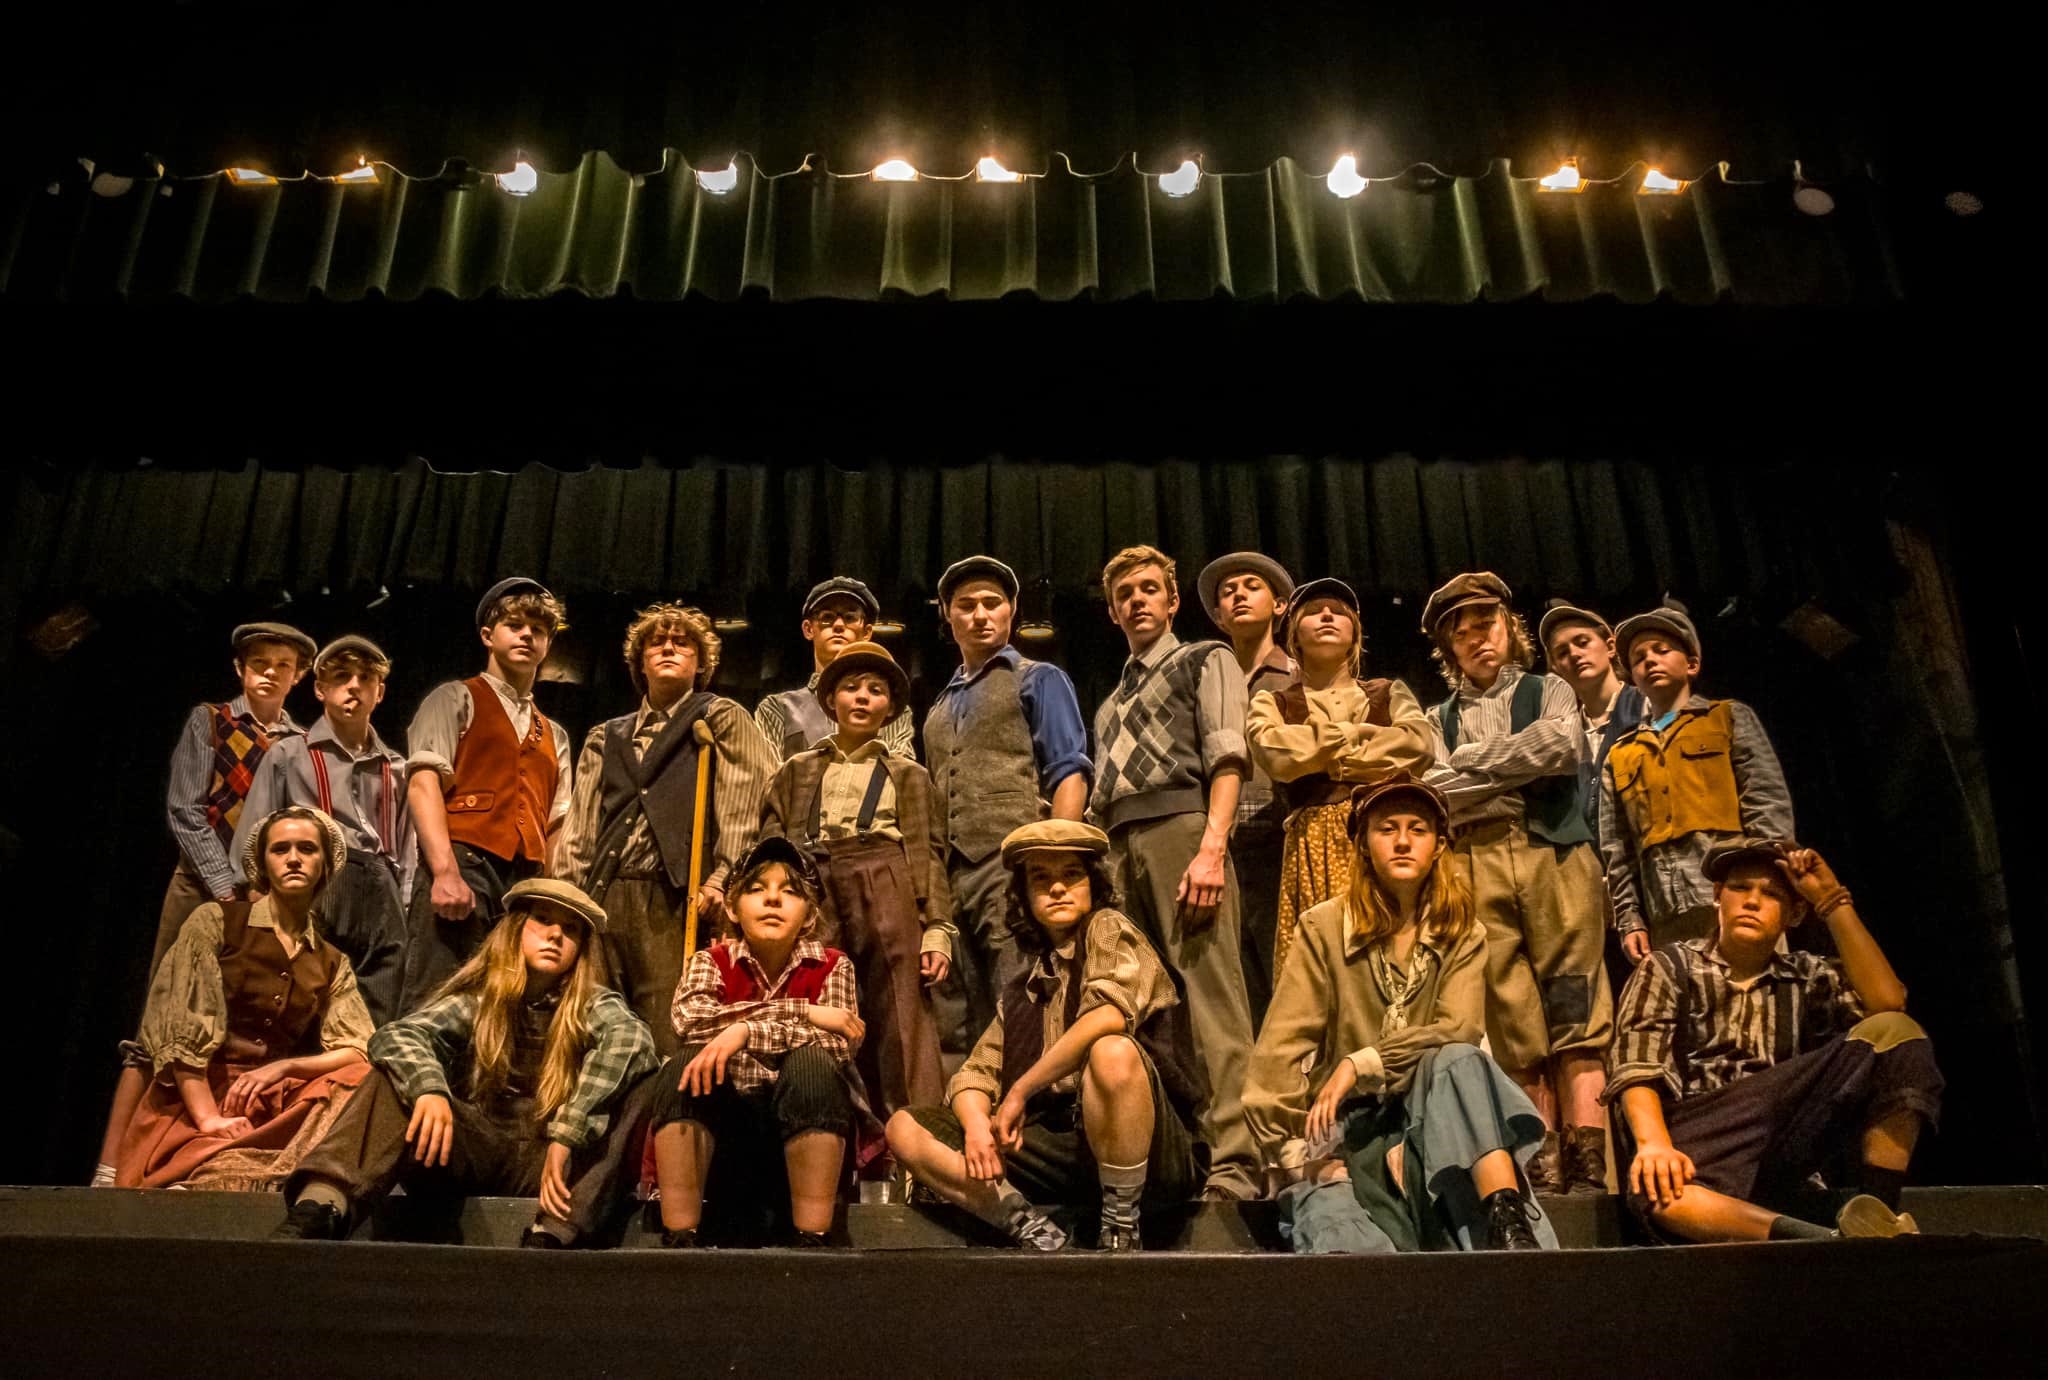 This is a group photo of newsies who are rehearsing for the musical "Newsies," which is coming to The Capitol Theatre for six shows in April. Photo courtesy of Eric Kaltenmark of EK Photography